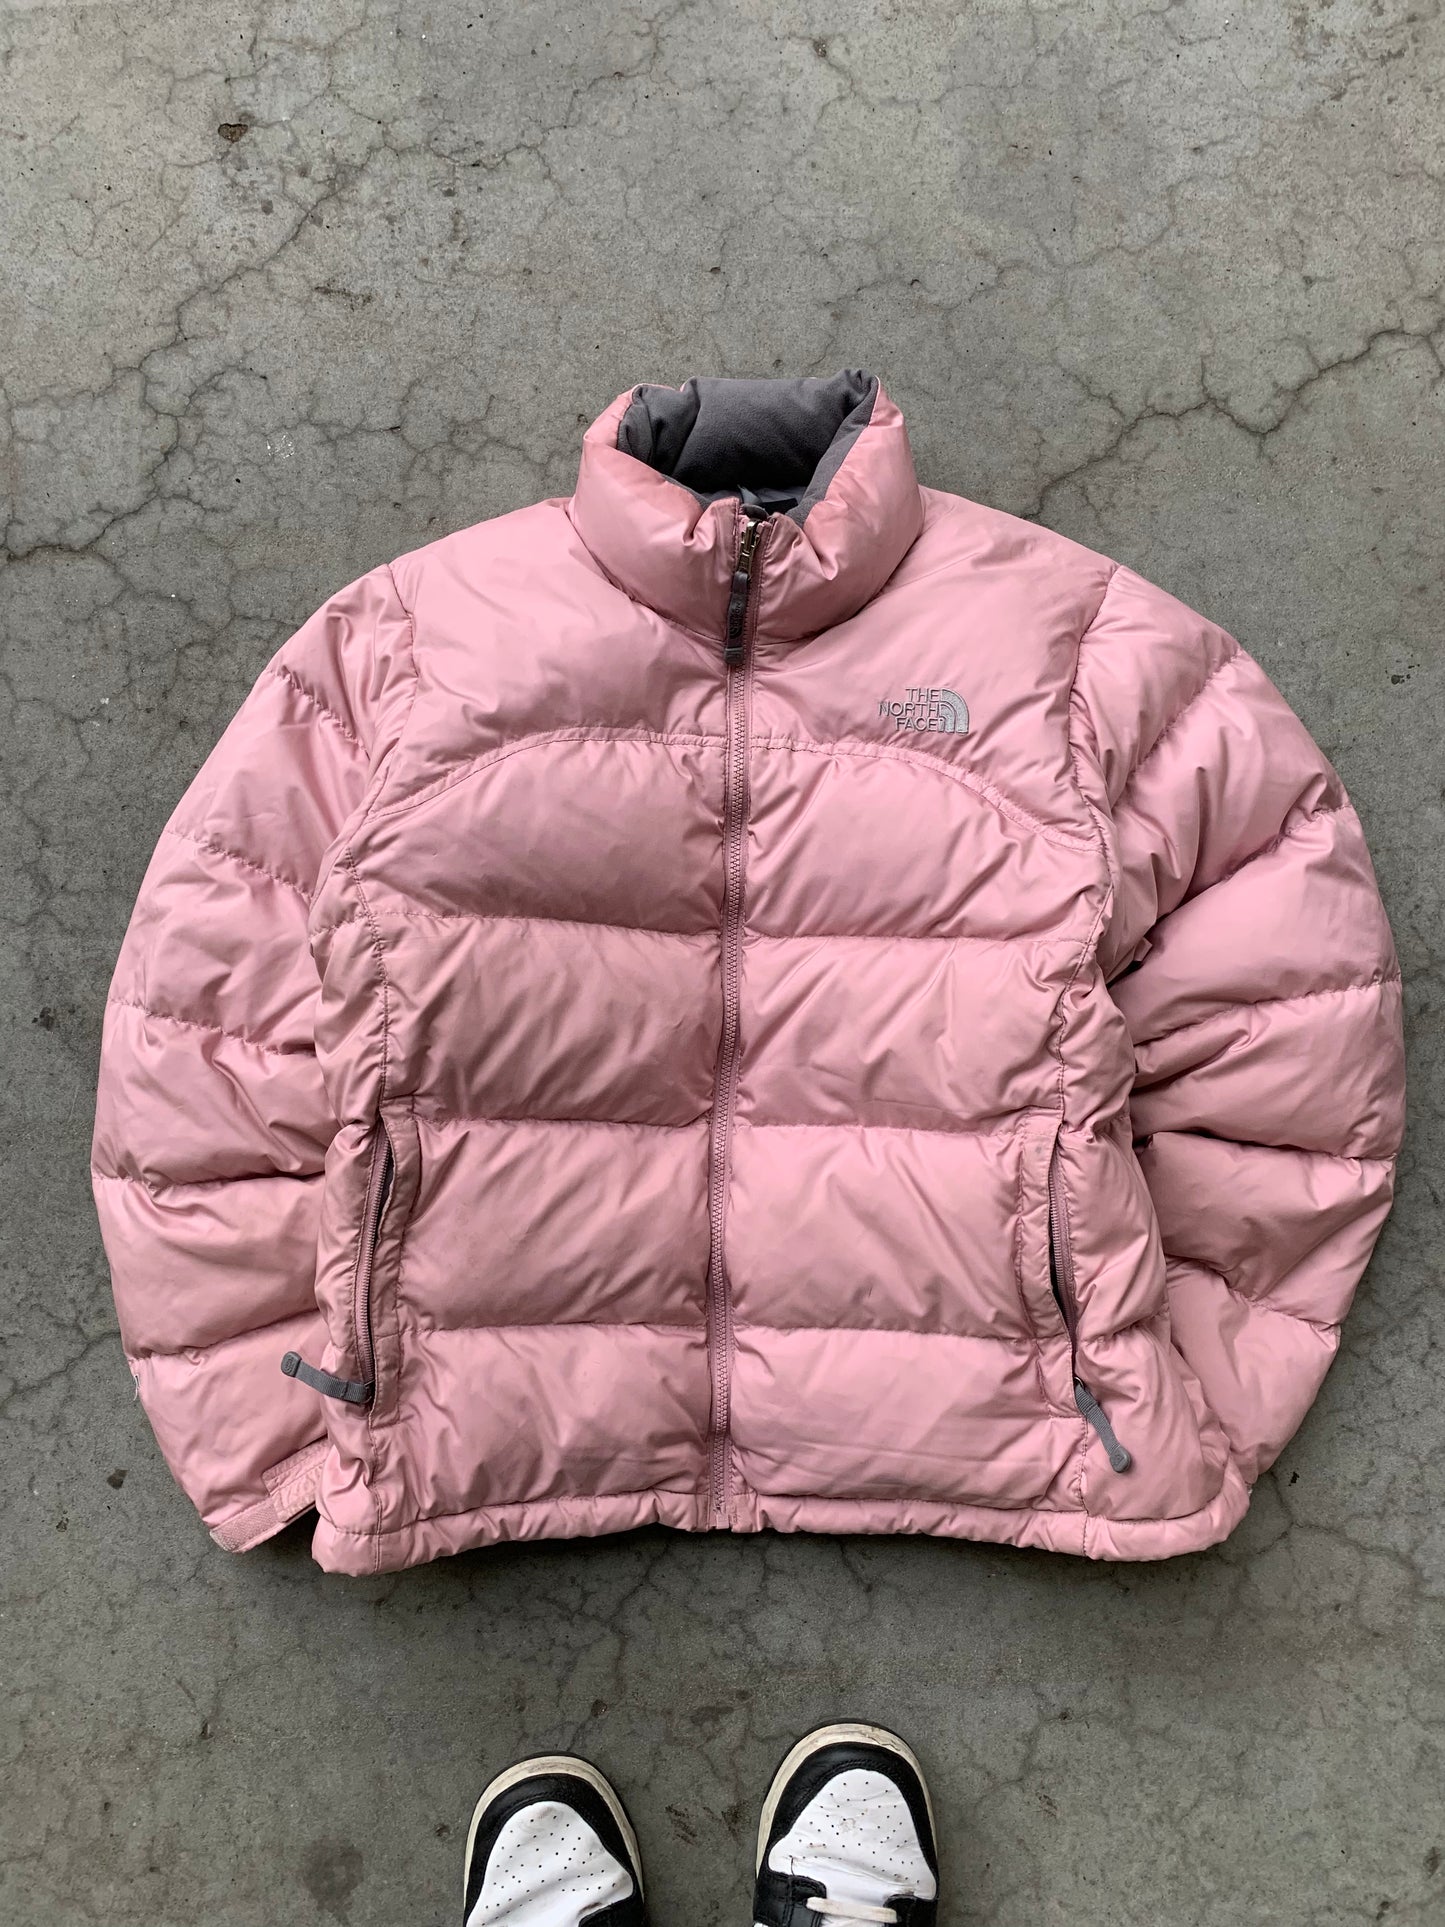 (L) The North Face 700 Pink Puffer